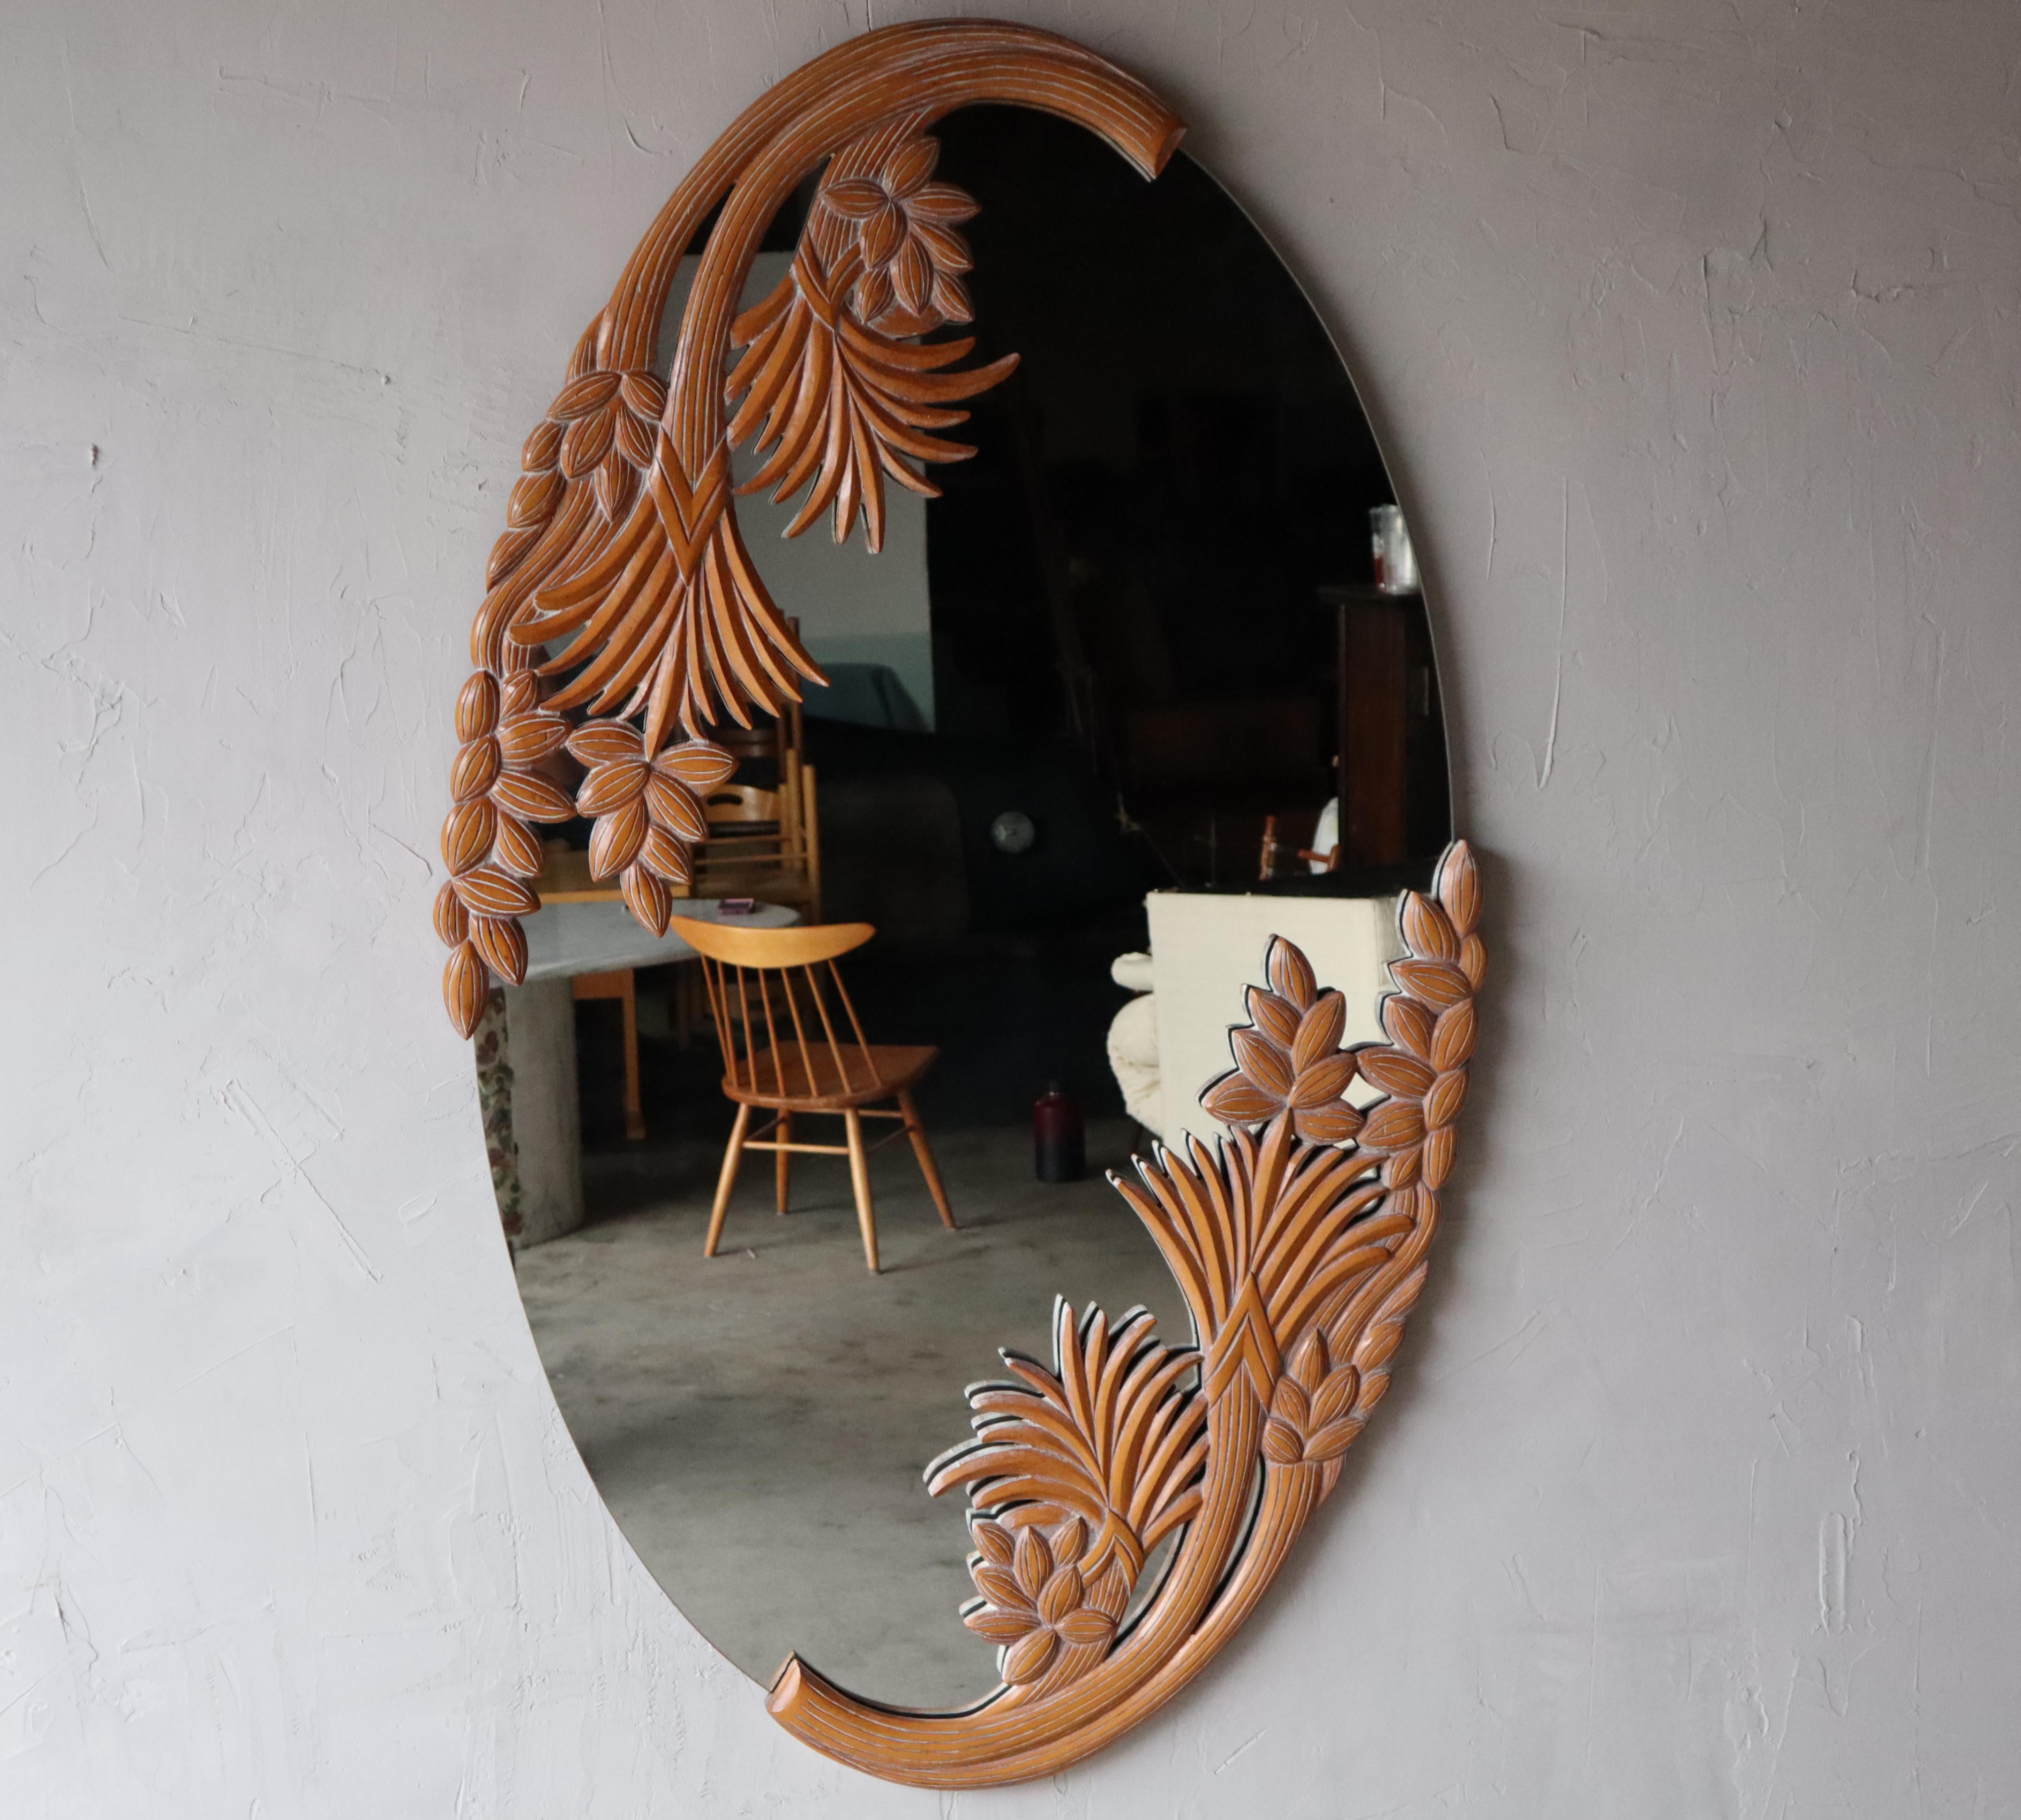 This stunning botanical wall mirror has an intricately carved and cerused wood frame. The mirror is fairly substantial measuring almost 5ftx3ft. It can be hung vertical or horizontal and has hanger on the back for either configuration. It would look